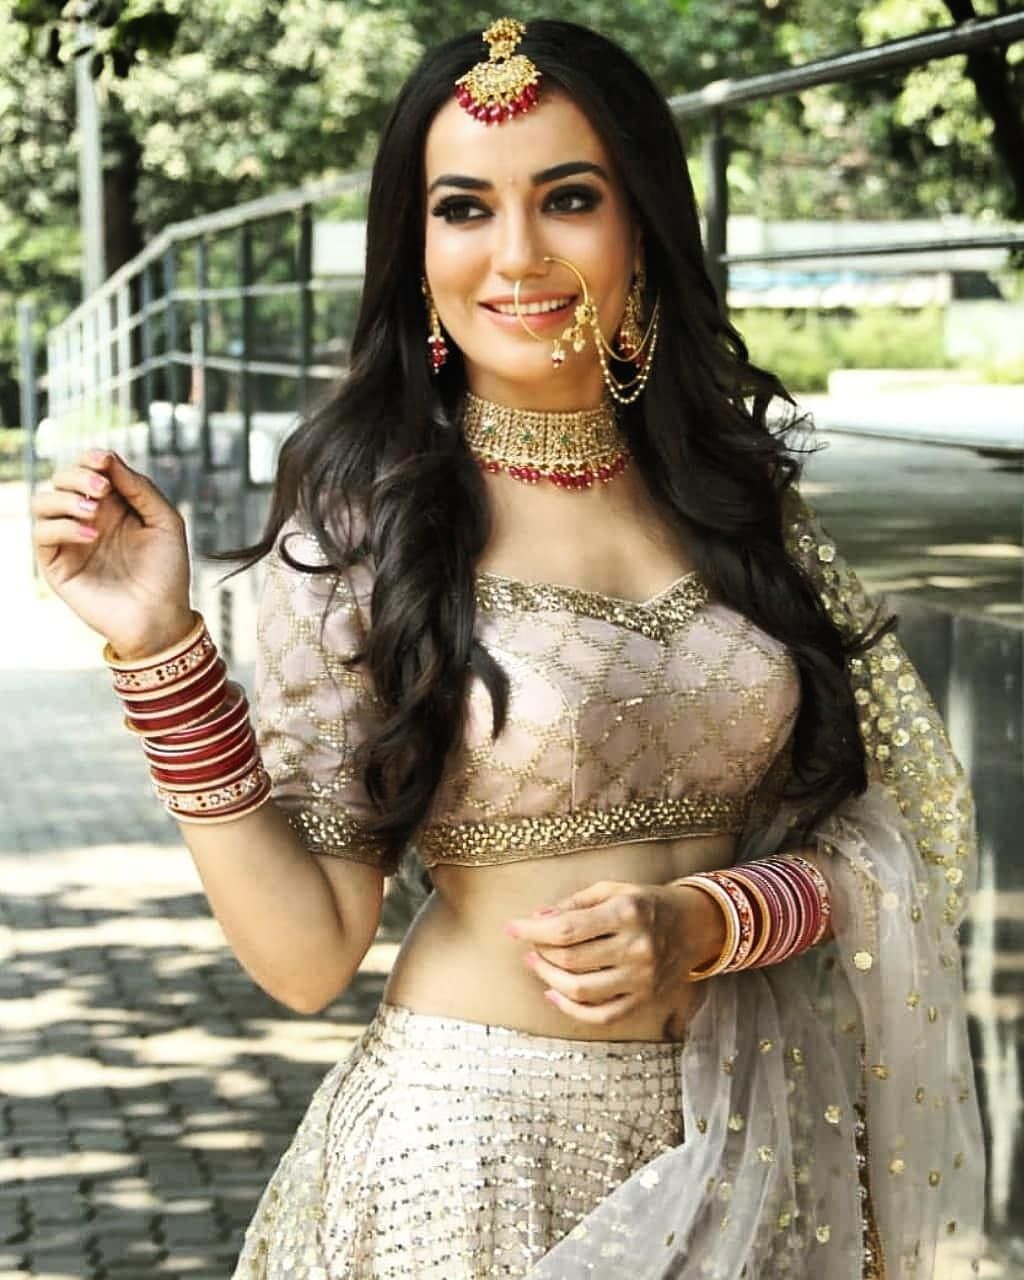 Unseen Photos Of Surbhi Jyoti From The Sets Of Naagin! 5